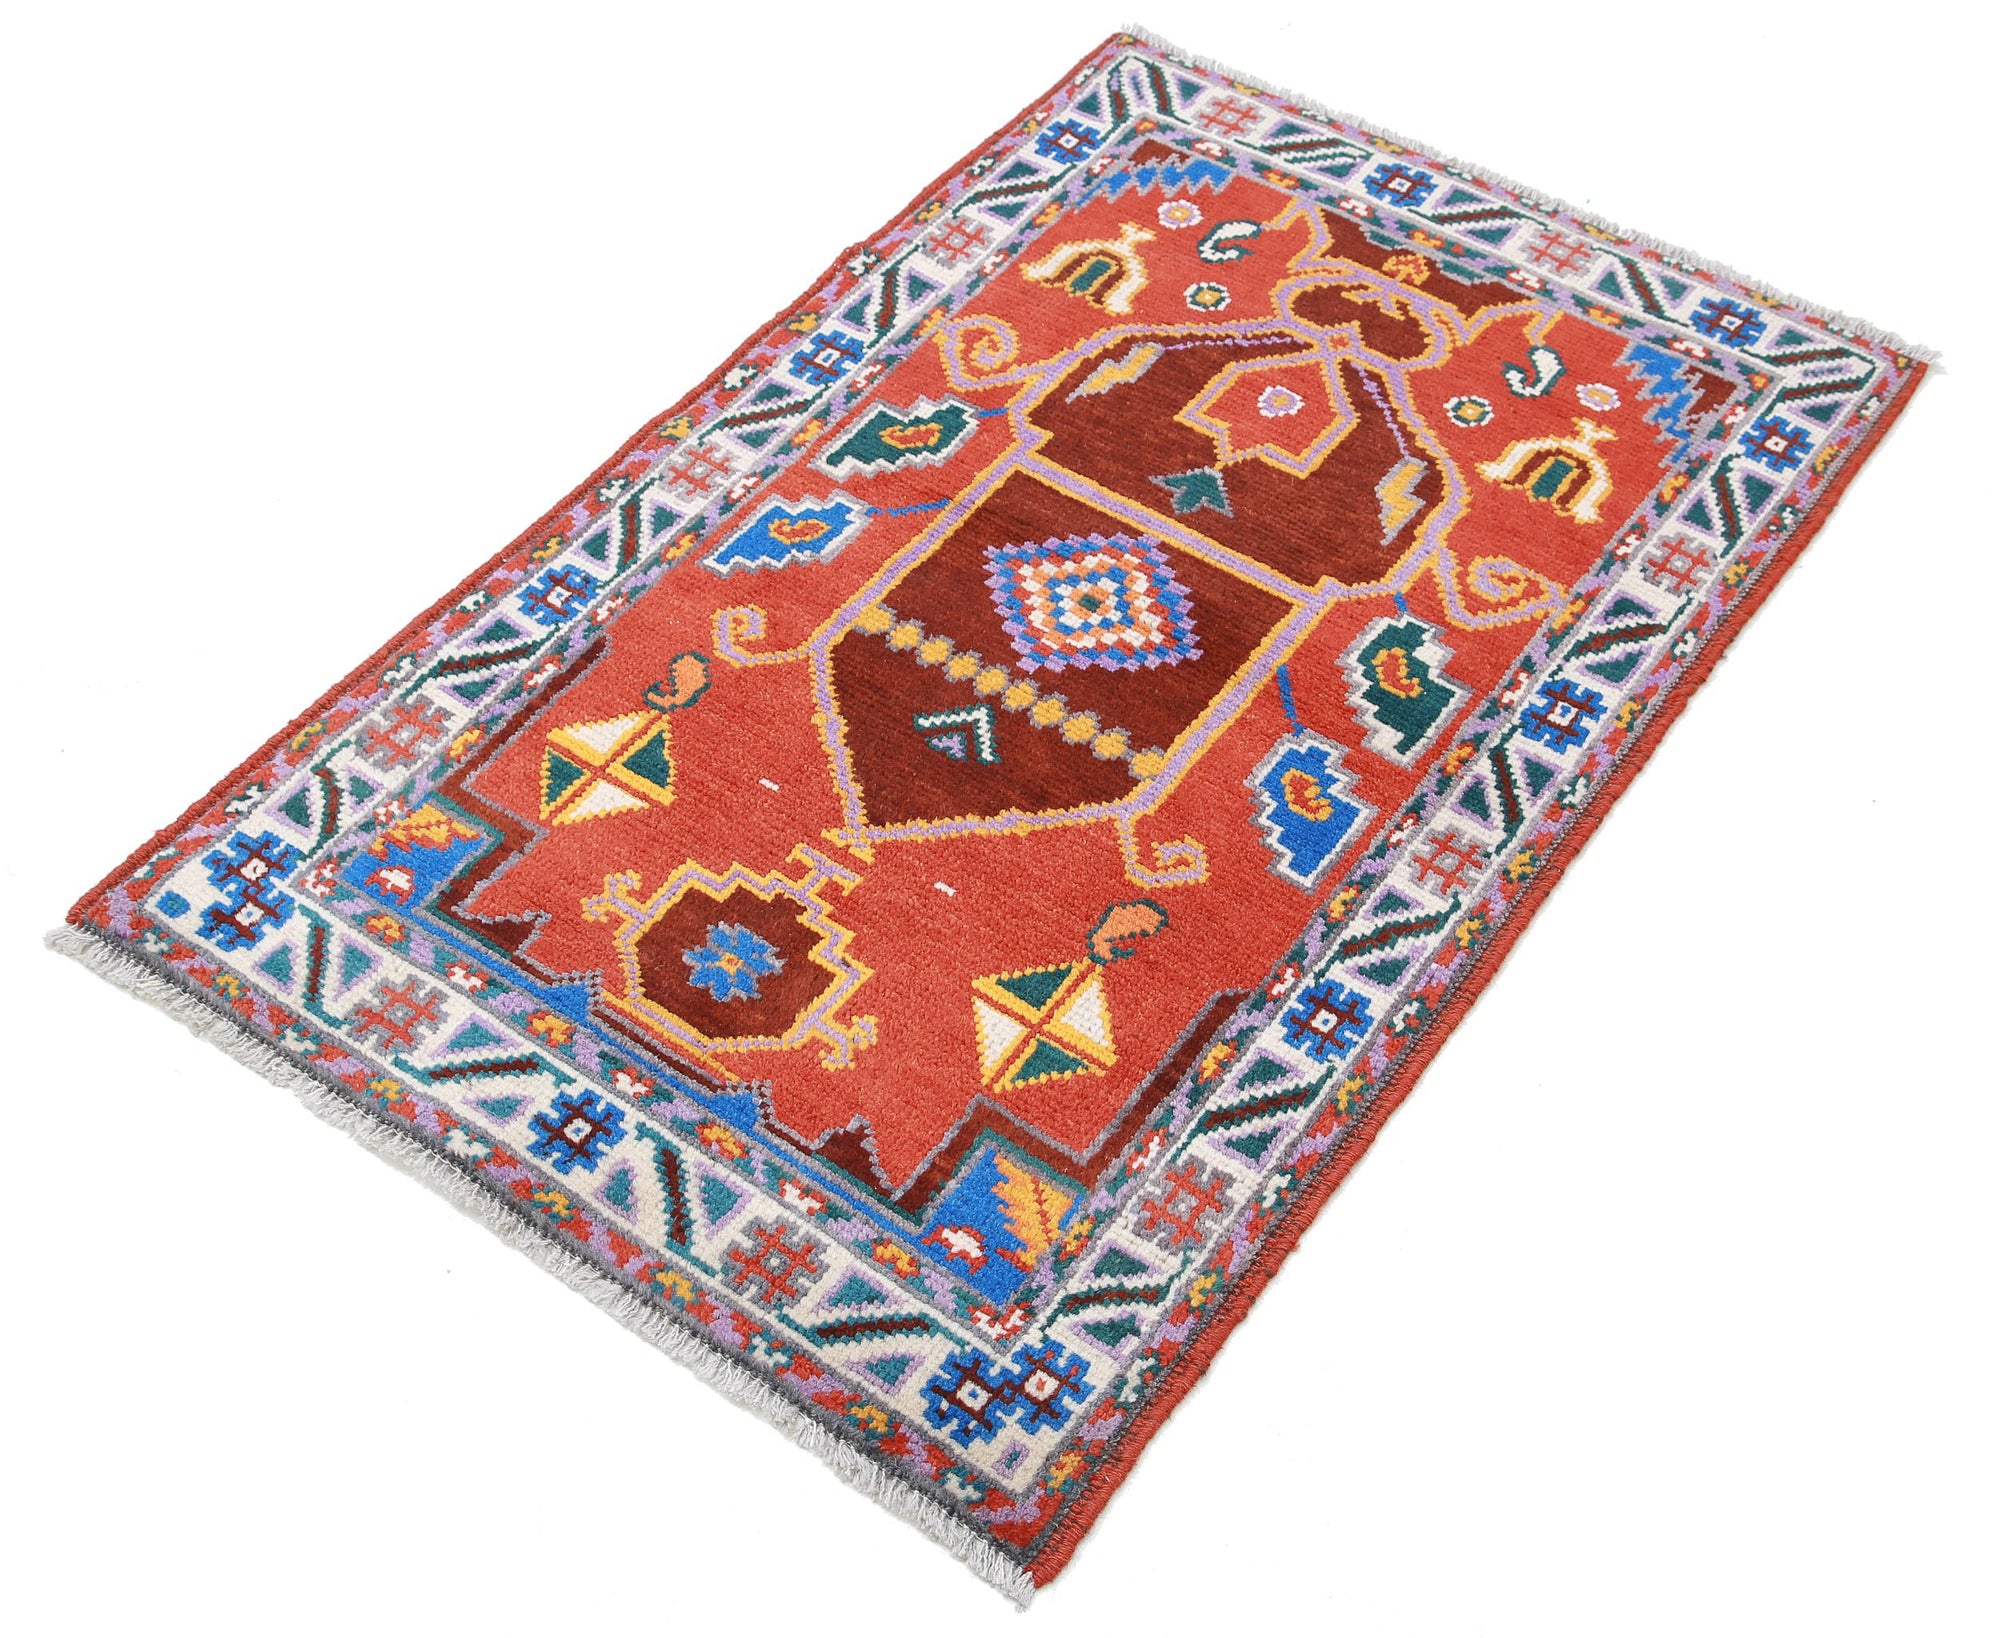 Revival-hand-knotted-qarghani-wool-rug-5014195-2.jpg